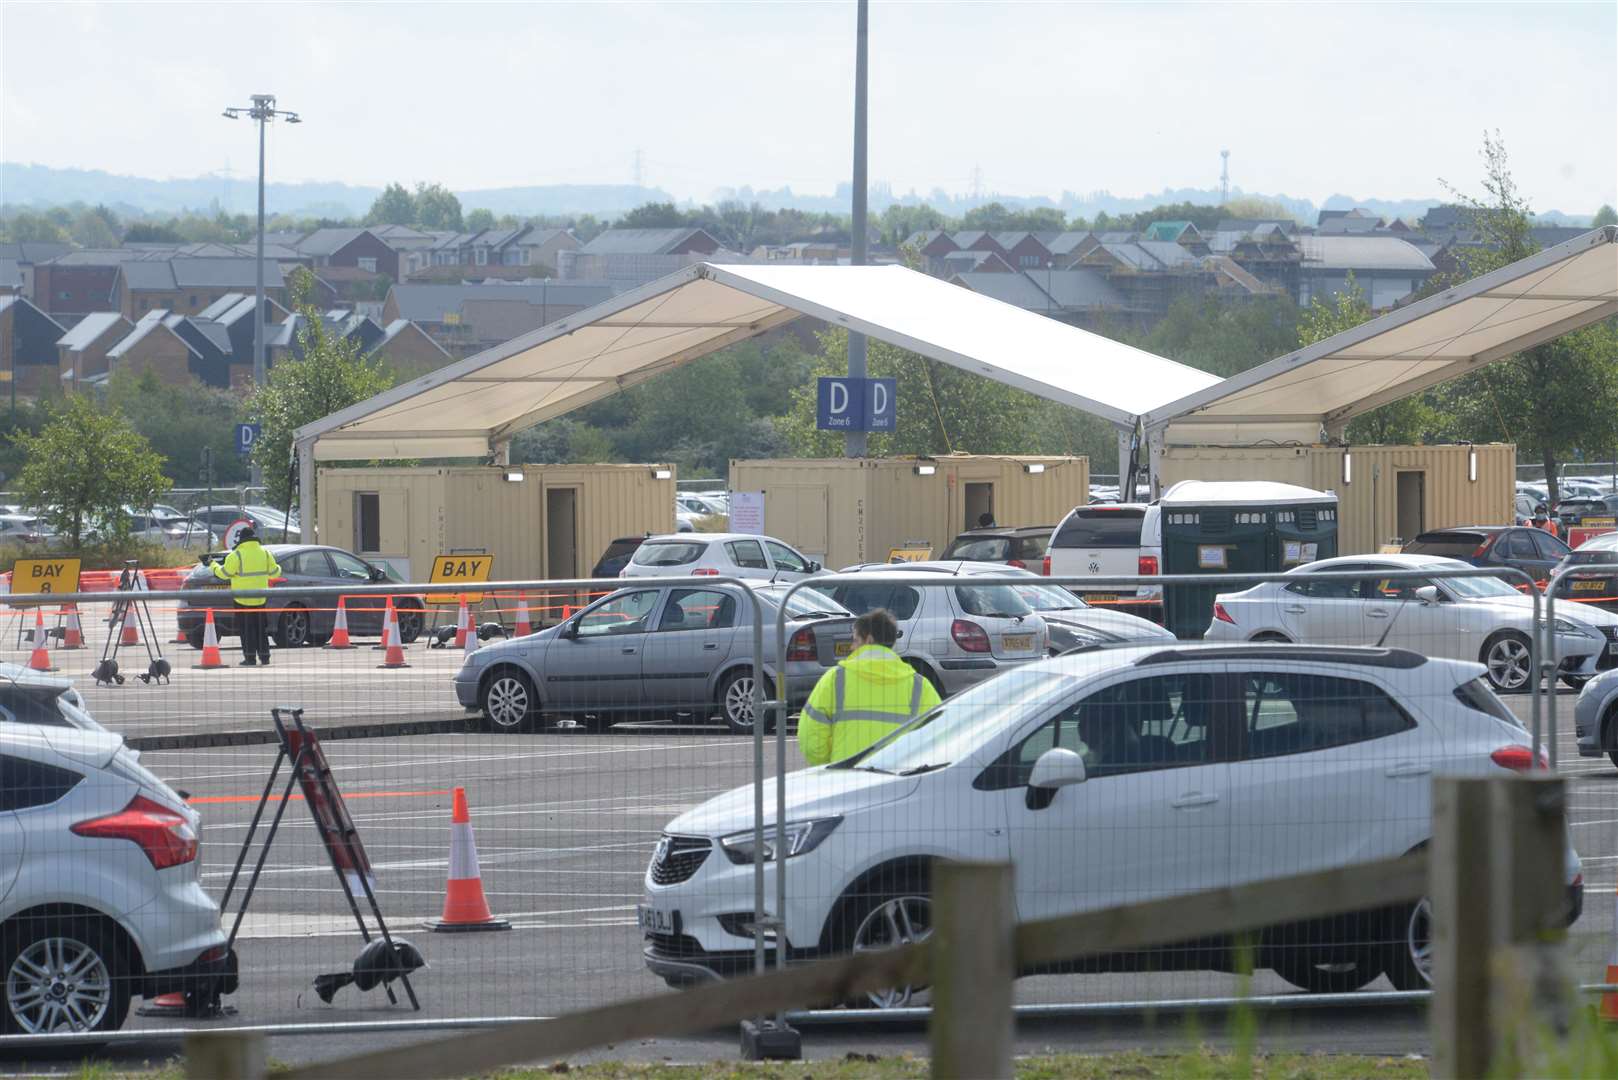 The coronavirus testing centre set up in one of the car parks at Ebbsfleet International. Picture: Chris Davey